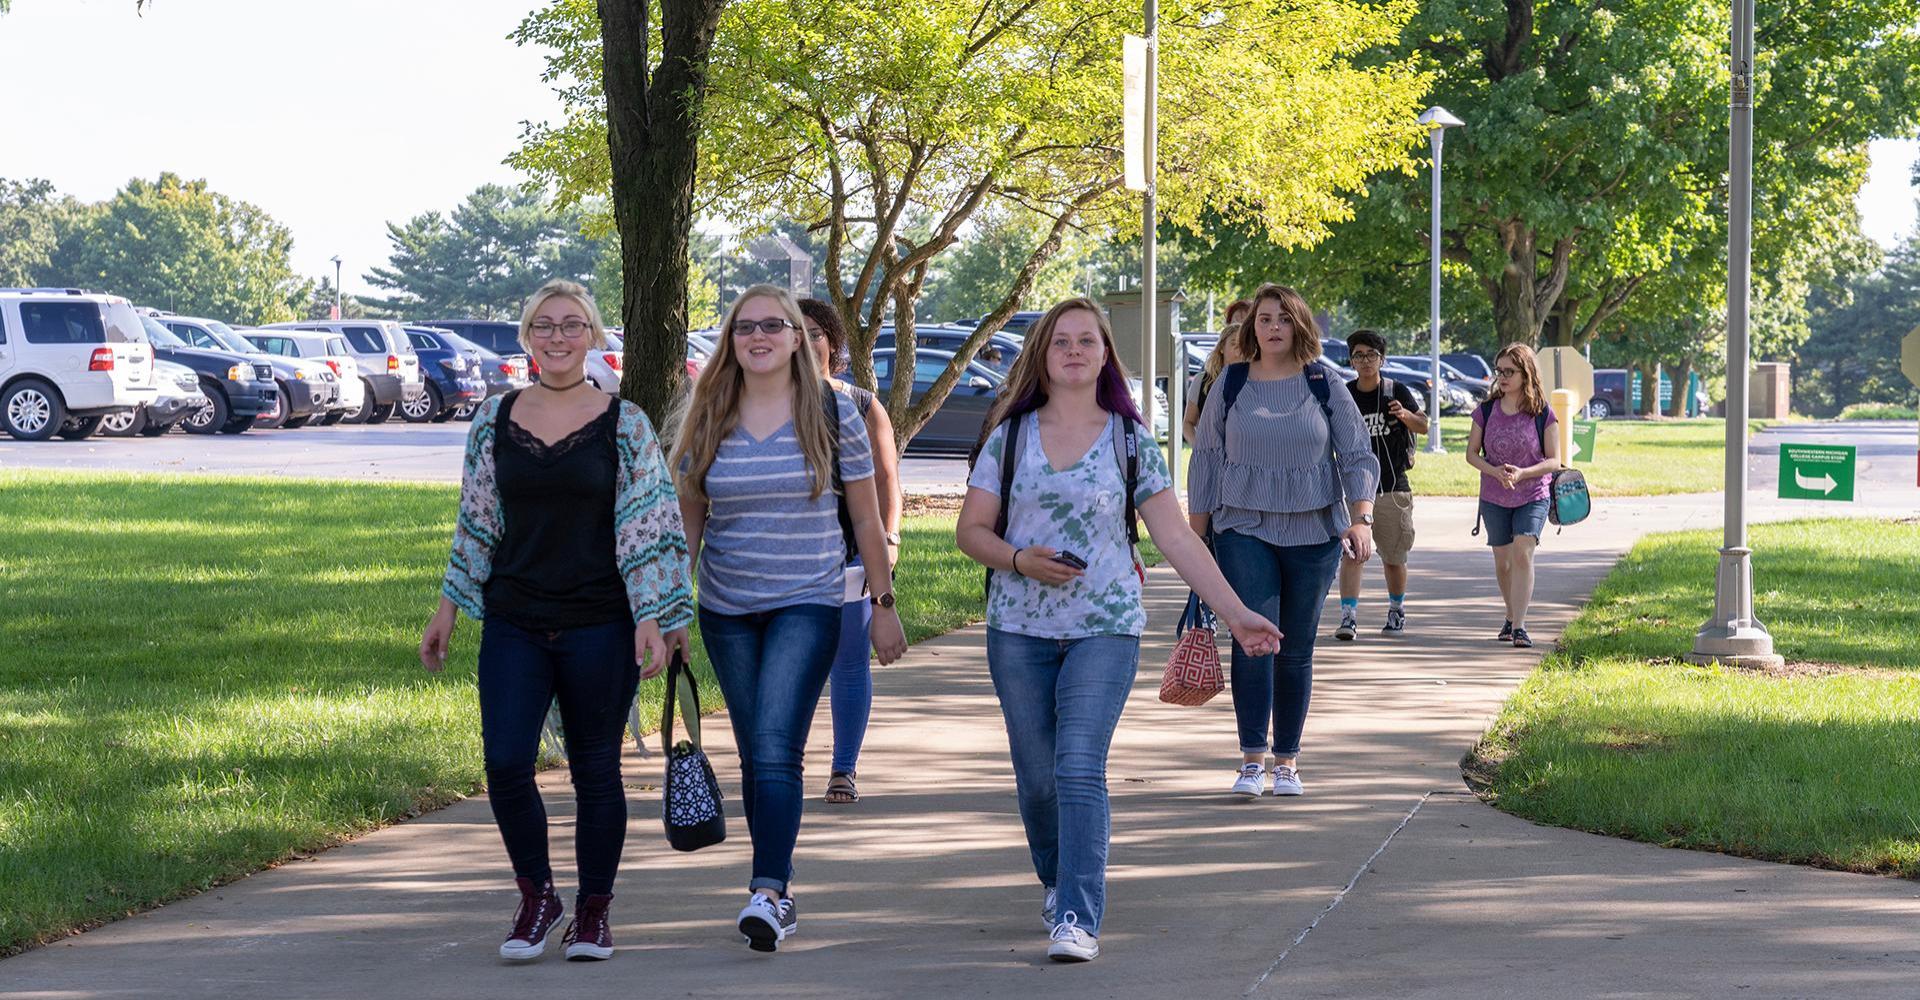 Students walking across campus